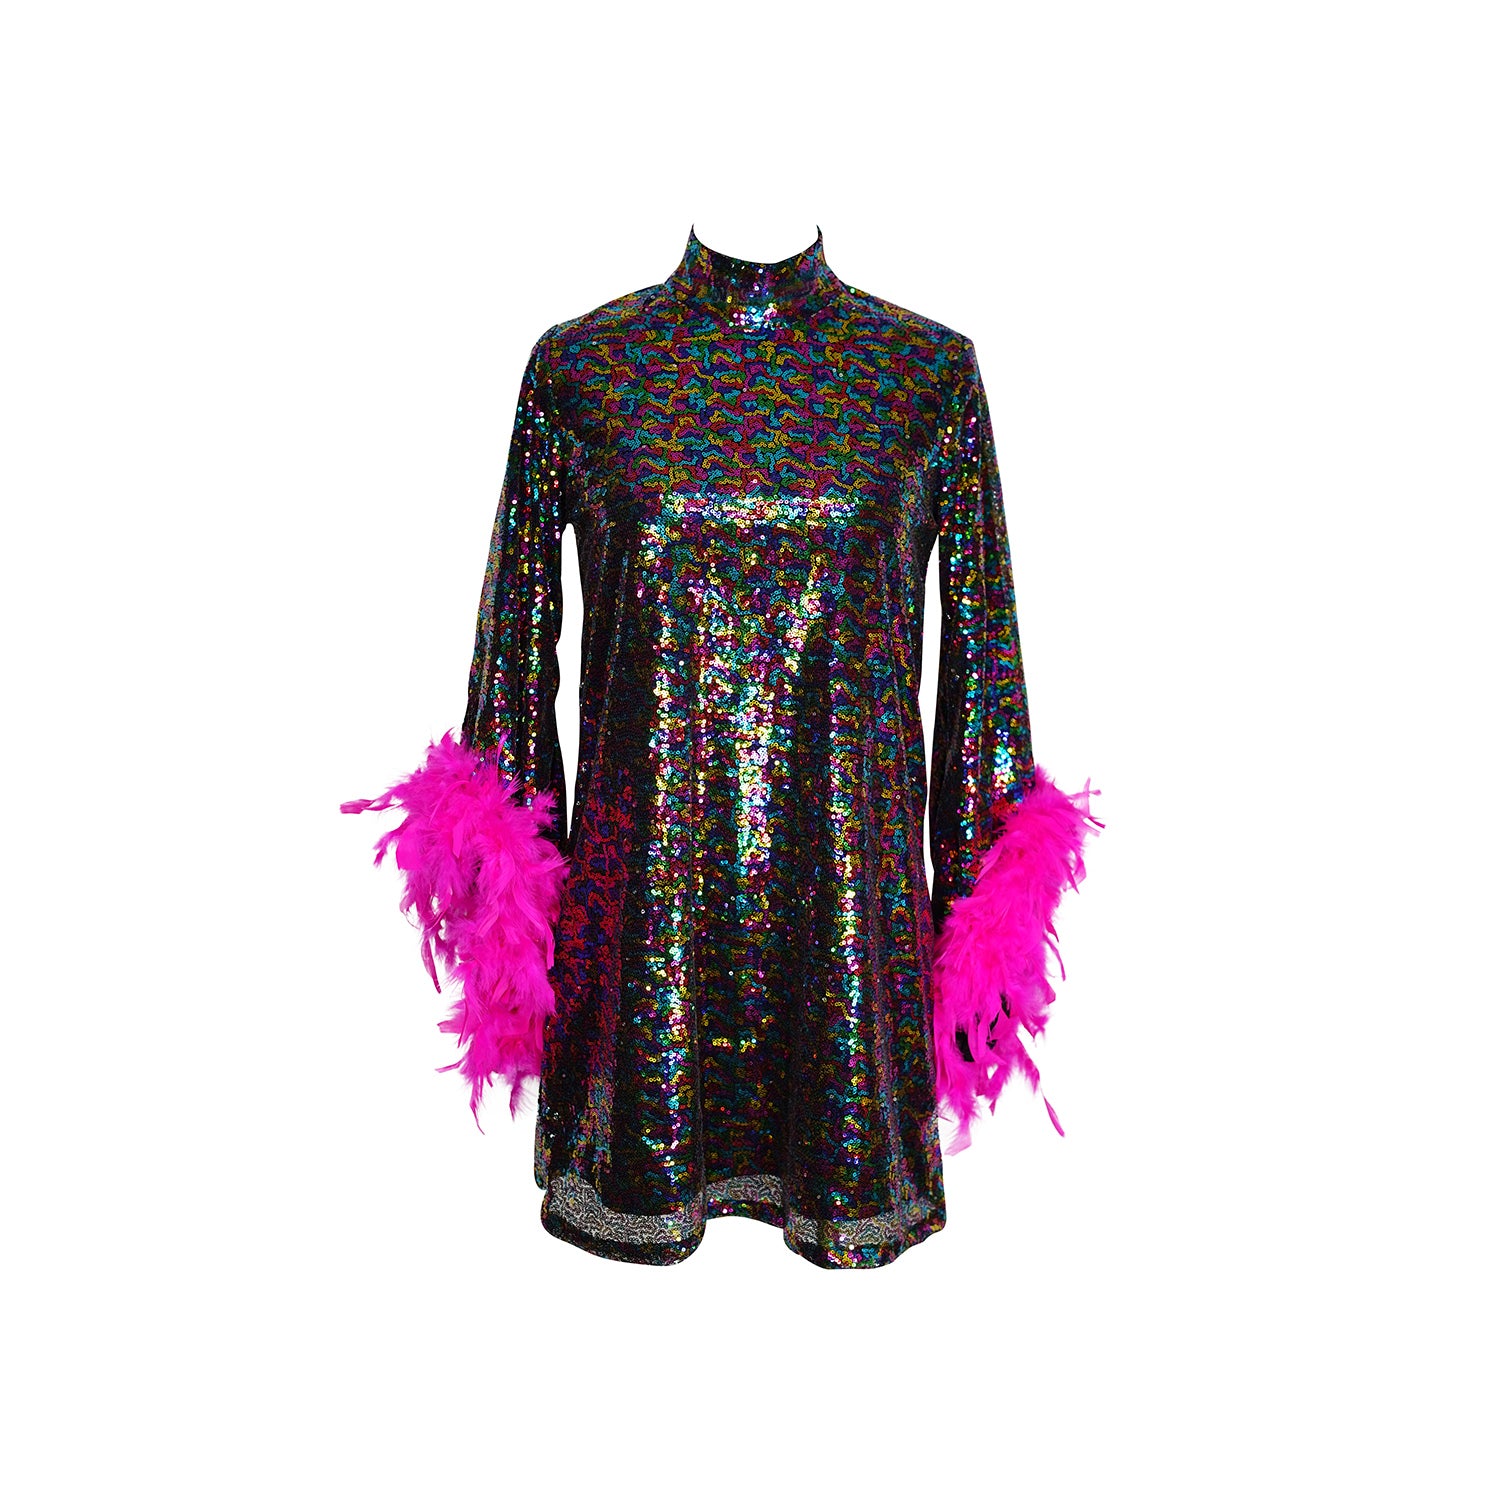 jennafer grace Time Warp Sequin Mini with Pink Feather Cuffs retro 1960s 60s revival mod mini dress with rainbow sequins bell sleeves feathered cuffs boho bohemian hippie romantic whimsical handmade in California USA